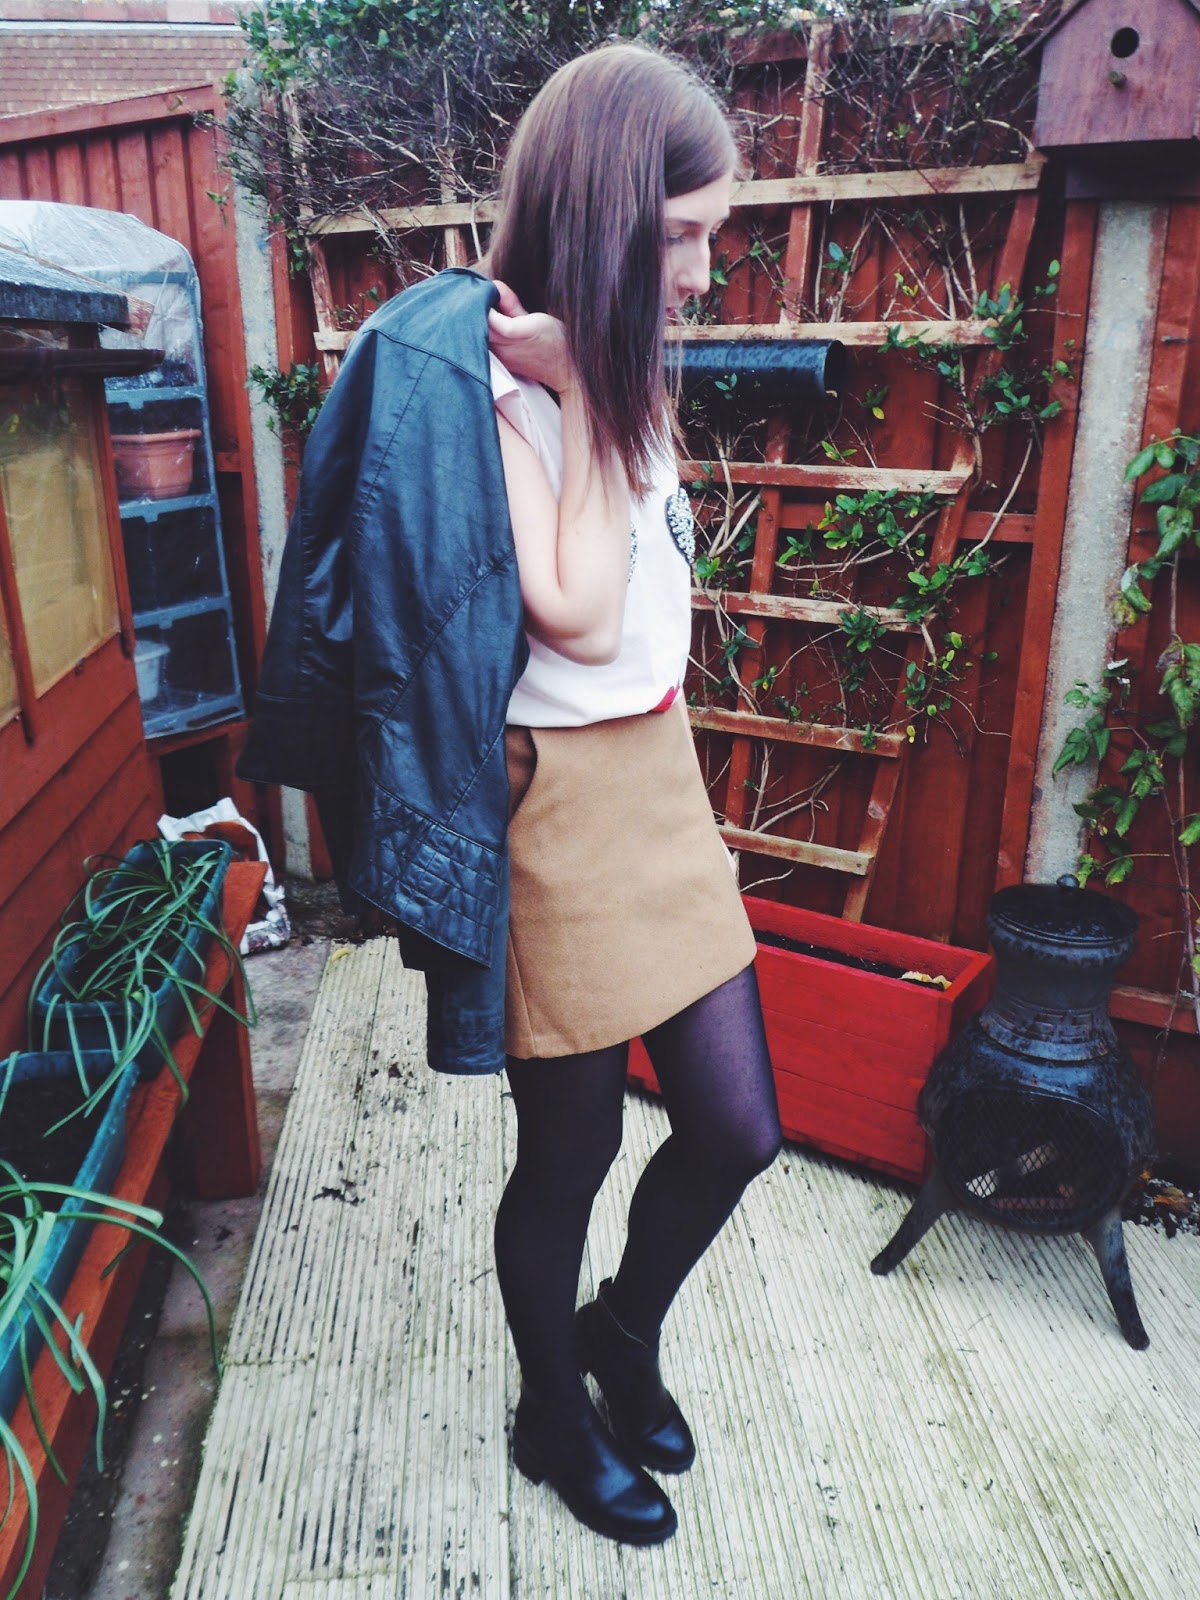 asos, asseenonme, wiw, whatimwearing, ootd, outfitoftheday, lotd, lookoftheday, fbloggers, fashionpost, fashionbloggers, camelskirt, matalan, asos, riverisland, primark, Next, fblogger, style